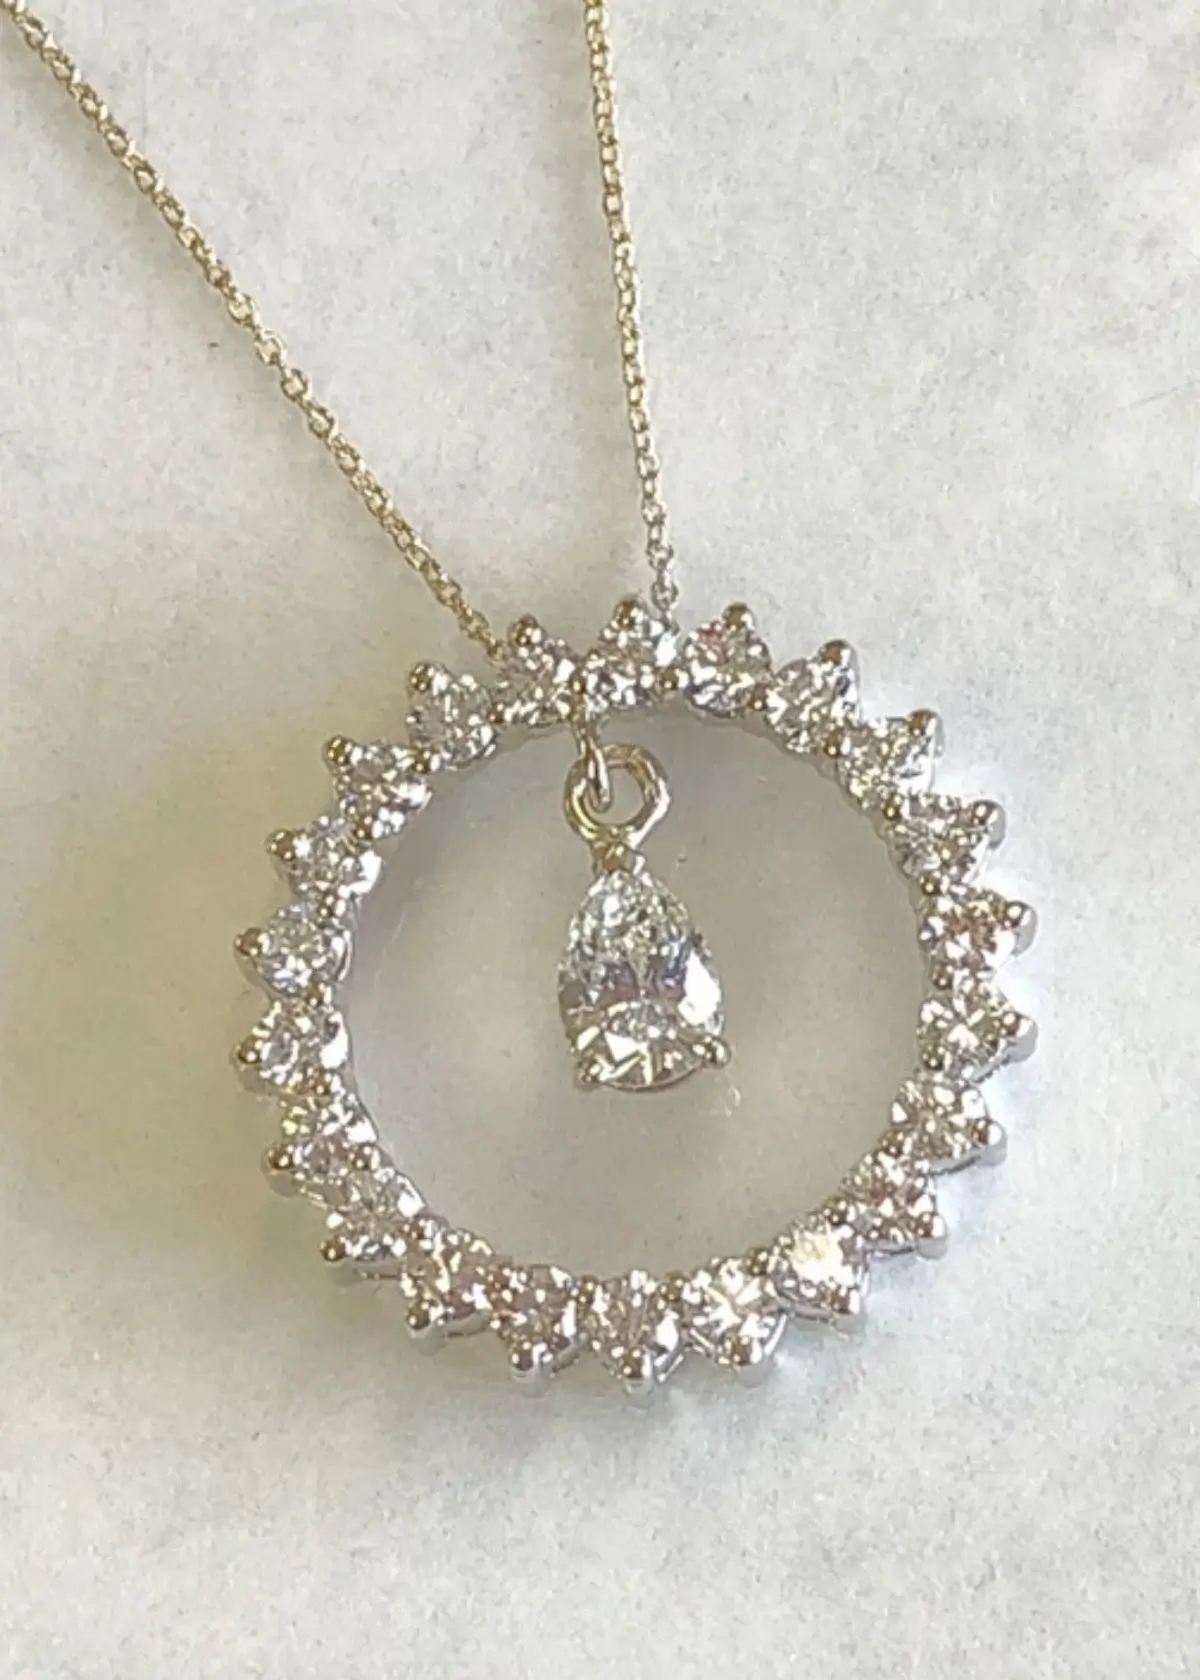 How do I choose the right diamond quality for an eternity necklace?